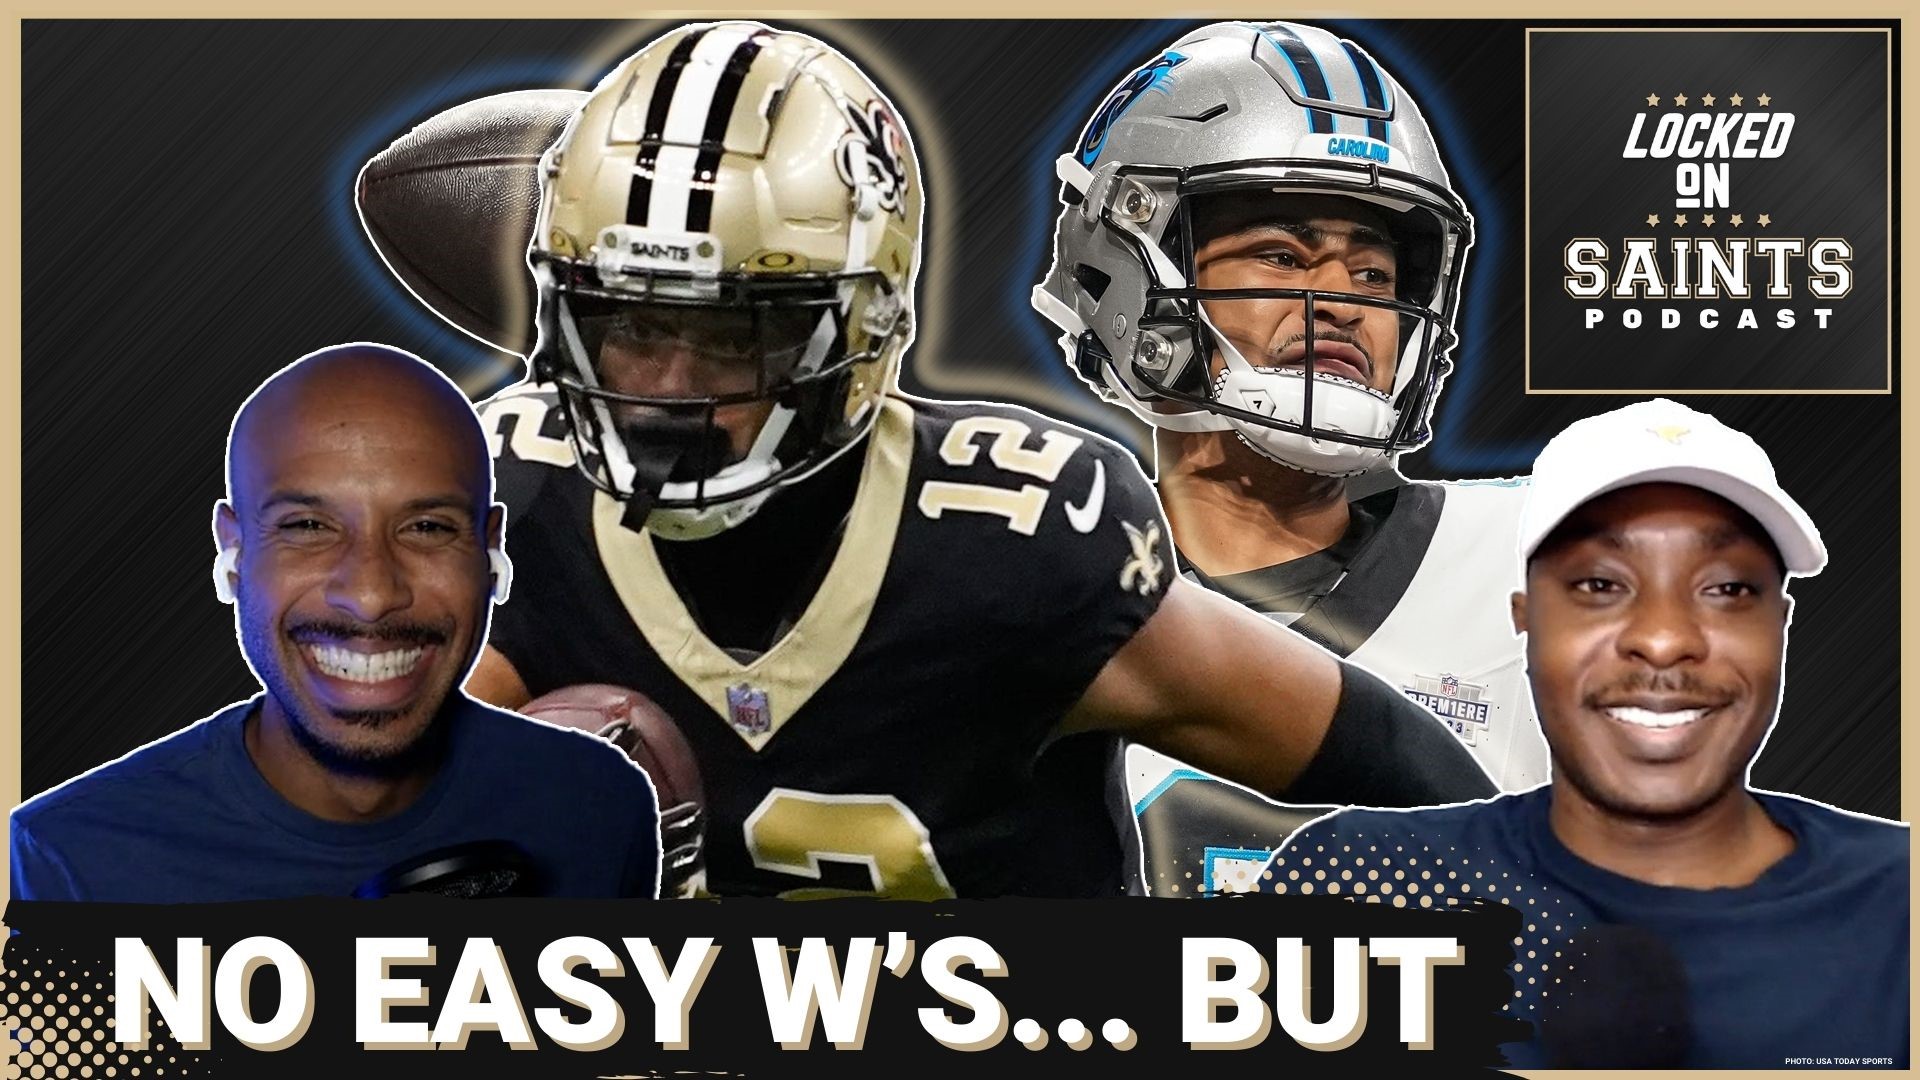 The New Orleans Saints and new quarterback Derek Carr should have an attainable victory ahead of the with the Carolina Panthers. But no NFL victories are a given.